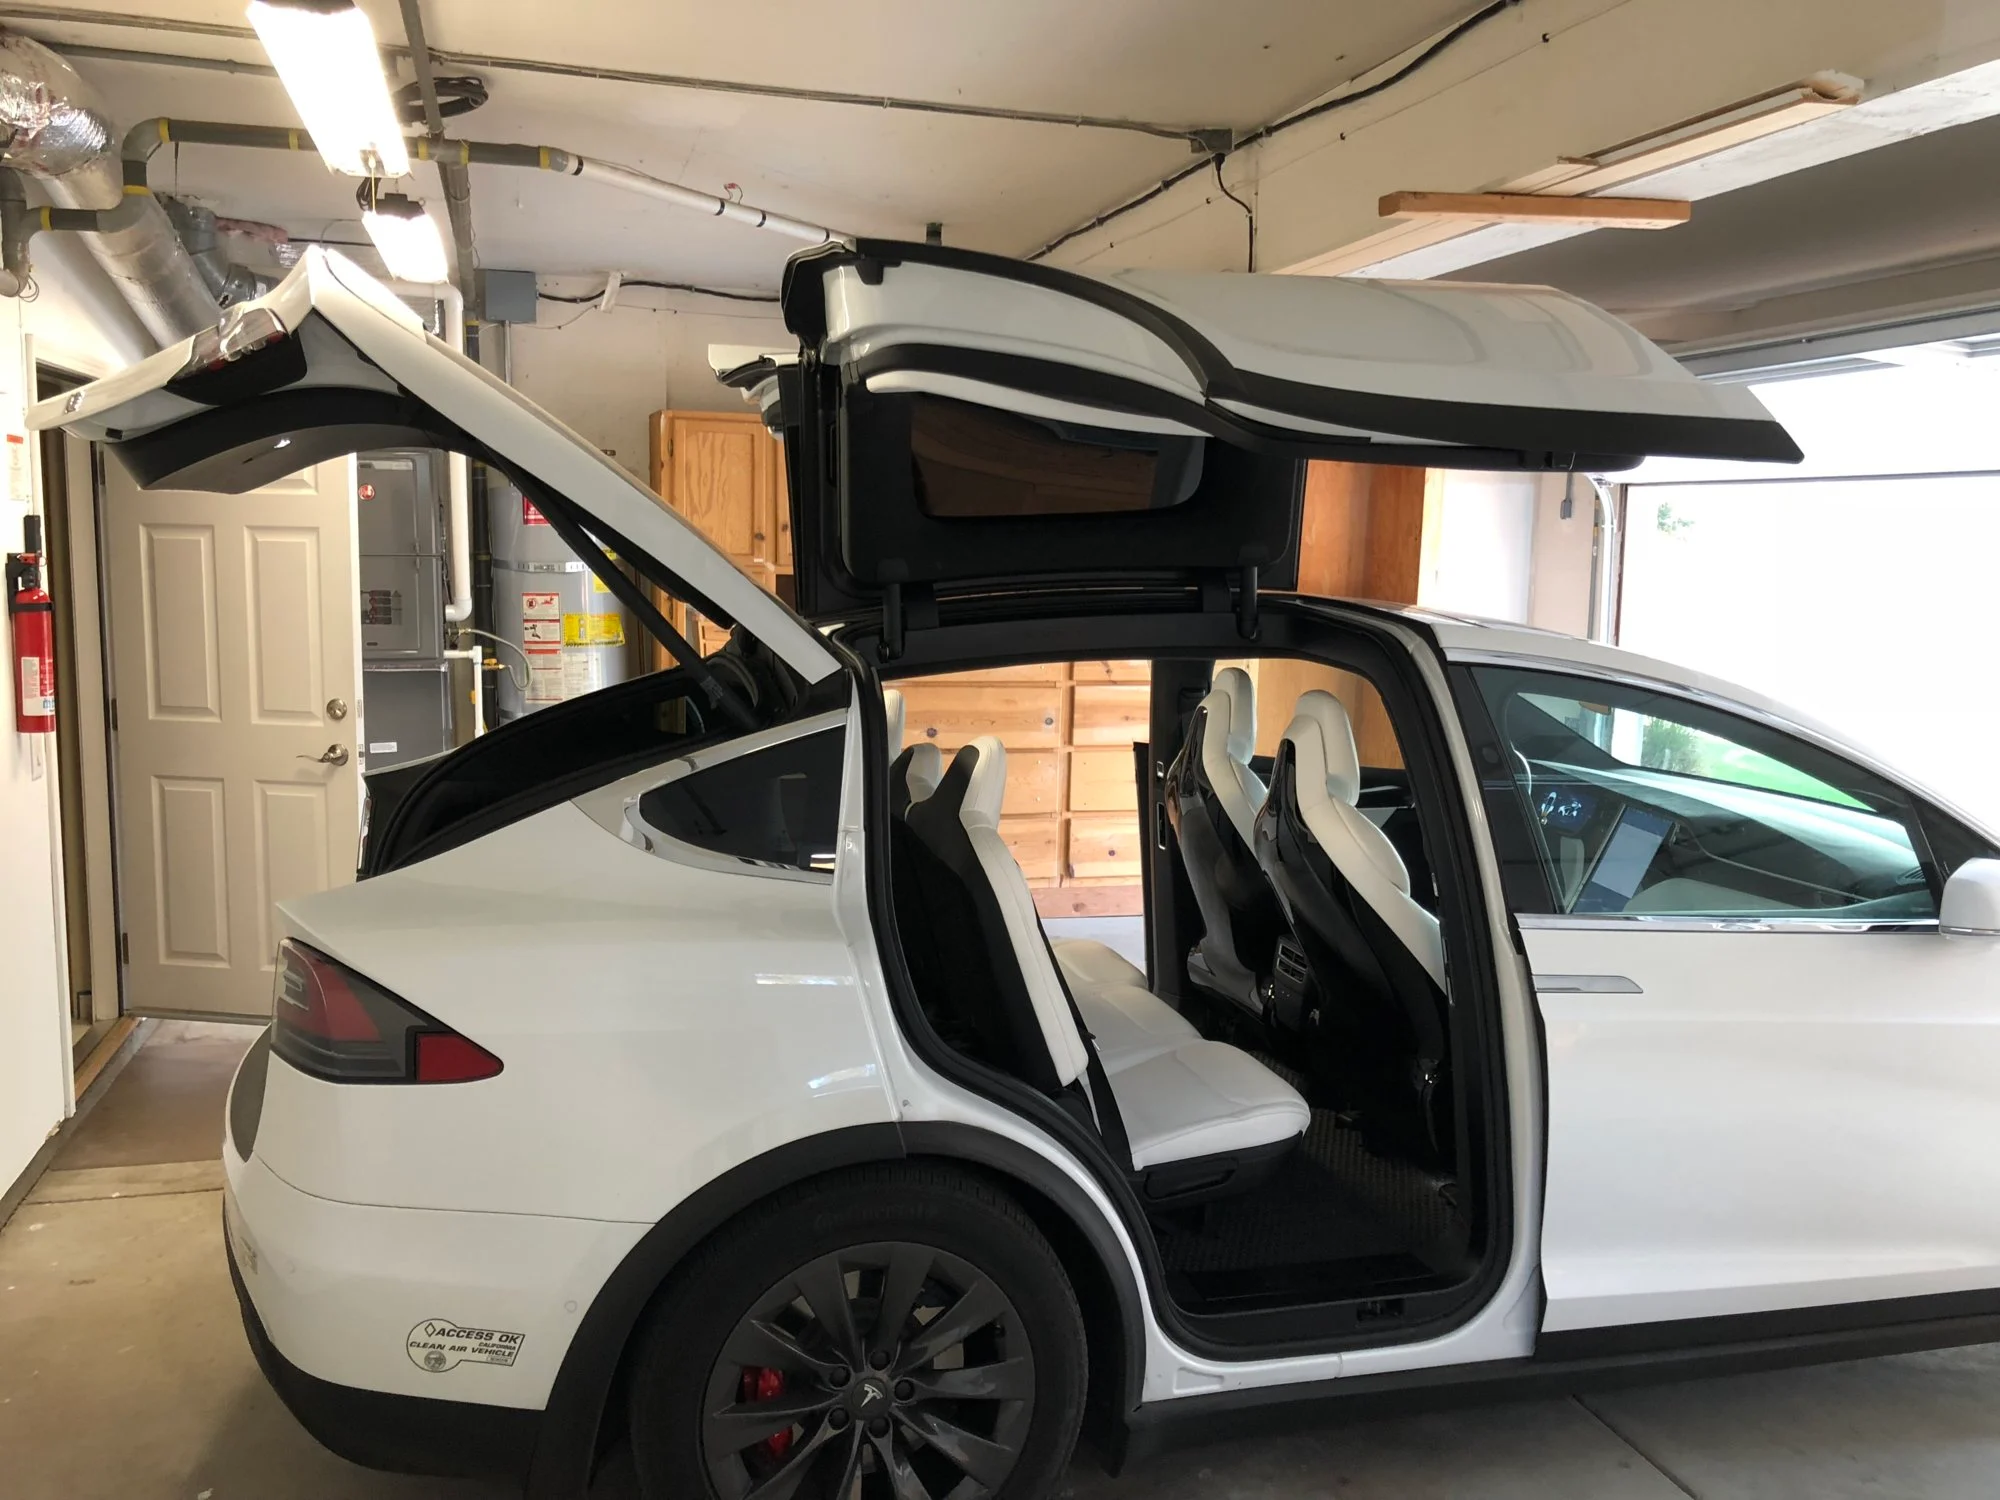 Enhance Your Tesla Model X with a Cutting-Edge Garage Door Openers System